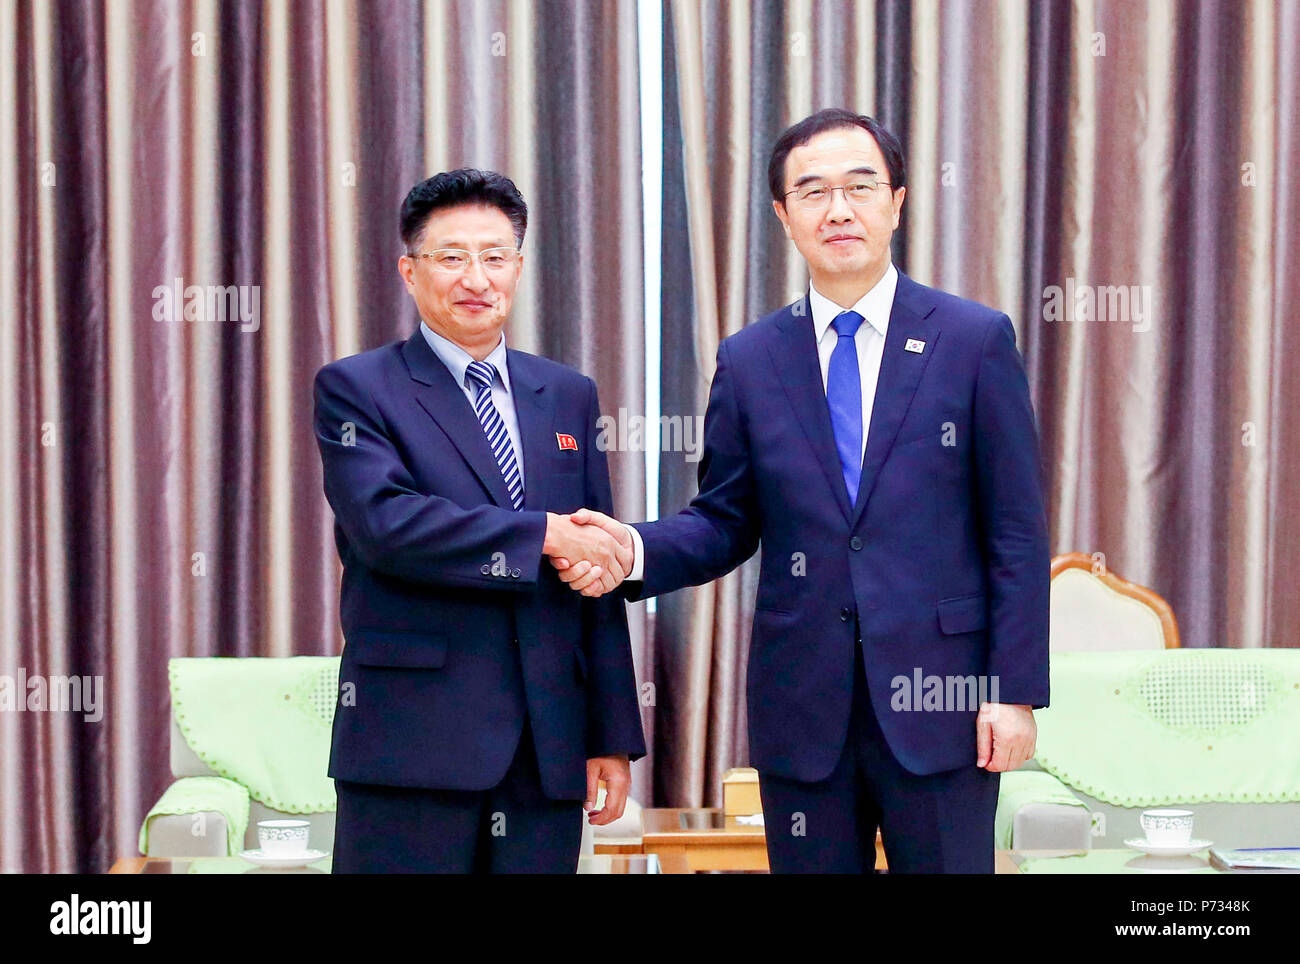 Cho Myoung-Gyon and Won Kil-U, July 3, 2018 : North Korea's Vice Sports Minister Won Kil-U (L) and South Korean Unification Minister Cho Myoung-Gyon pose upon the latter's arrival at the Pyongyang Sunan International Airport in Pyongyang, North Korea. The 100-strong South Korean delegation of athletes, coaches, government officials and journalists arrived in Pyongyang on Tuesday. South and North Korea plan to hold four inter-Korean friendly basketball matches in Pyongyang on Wednesday and Thursday. The inter-Korean basketball matches will be held for the first time in 15 years. EDITORIAL USE O Stock Photo